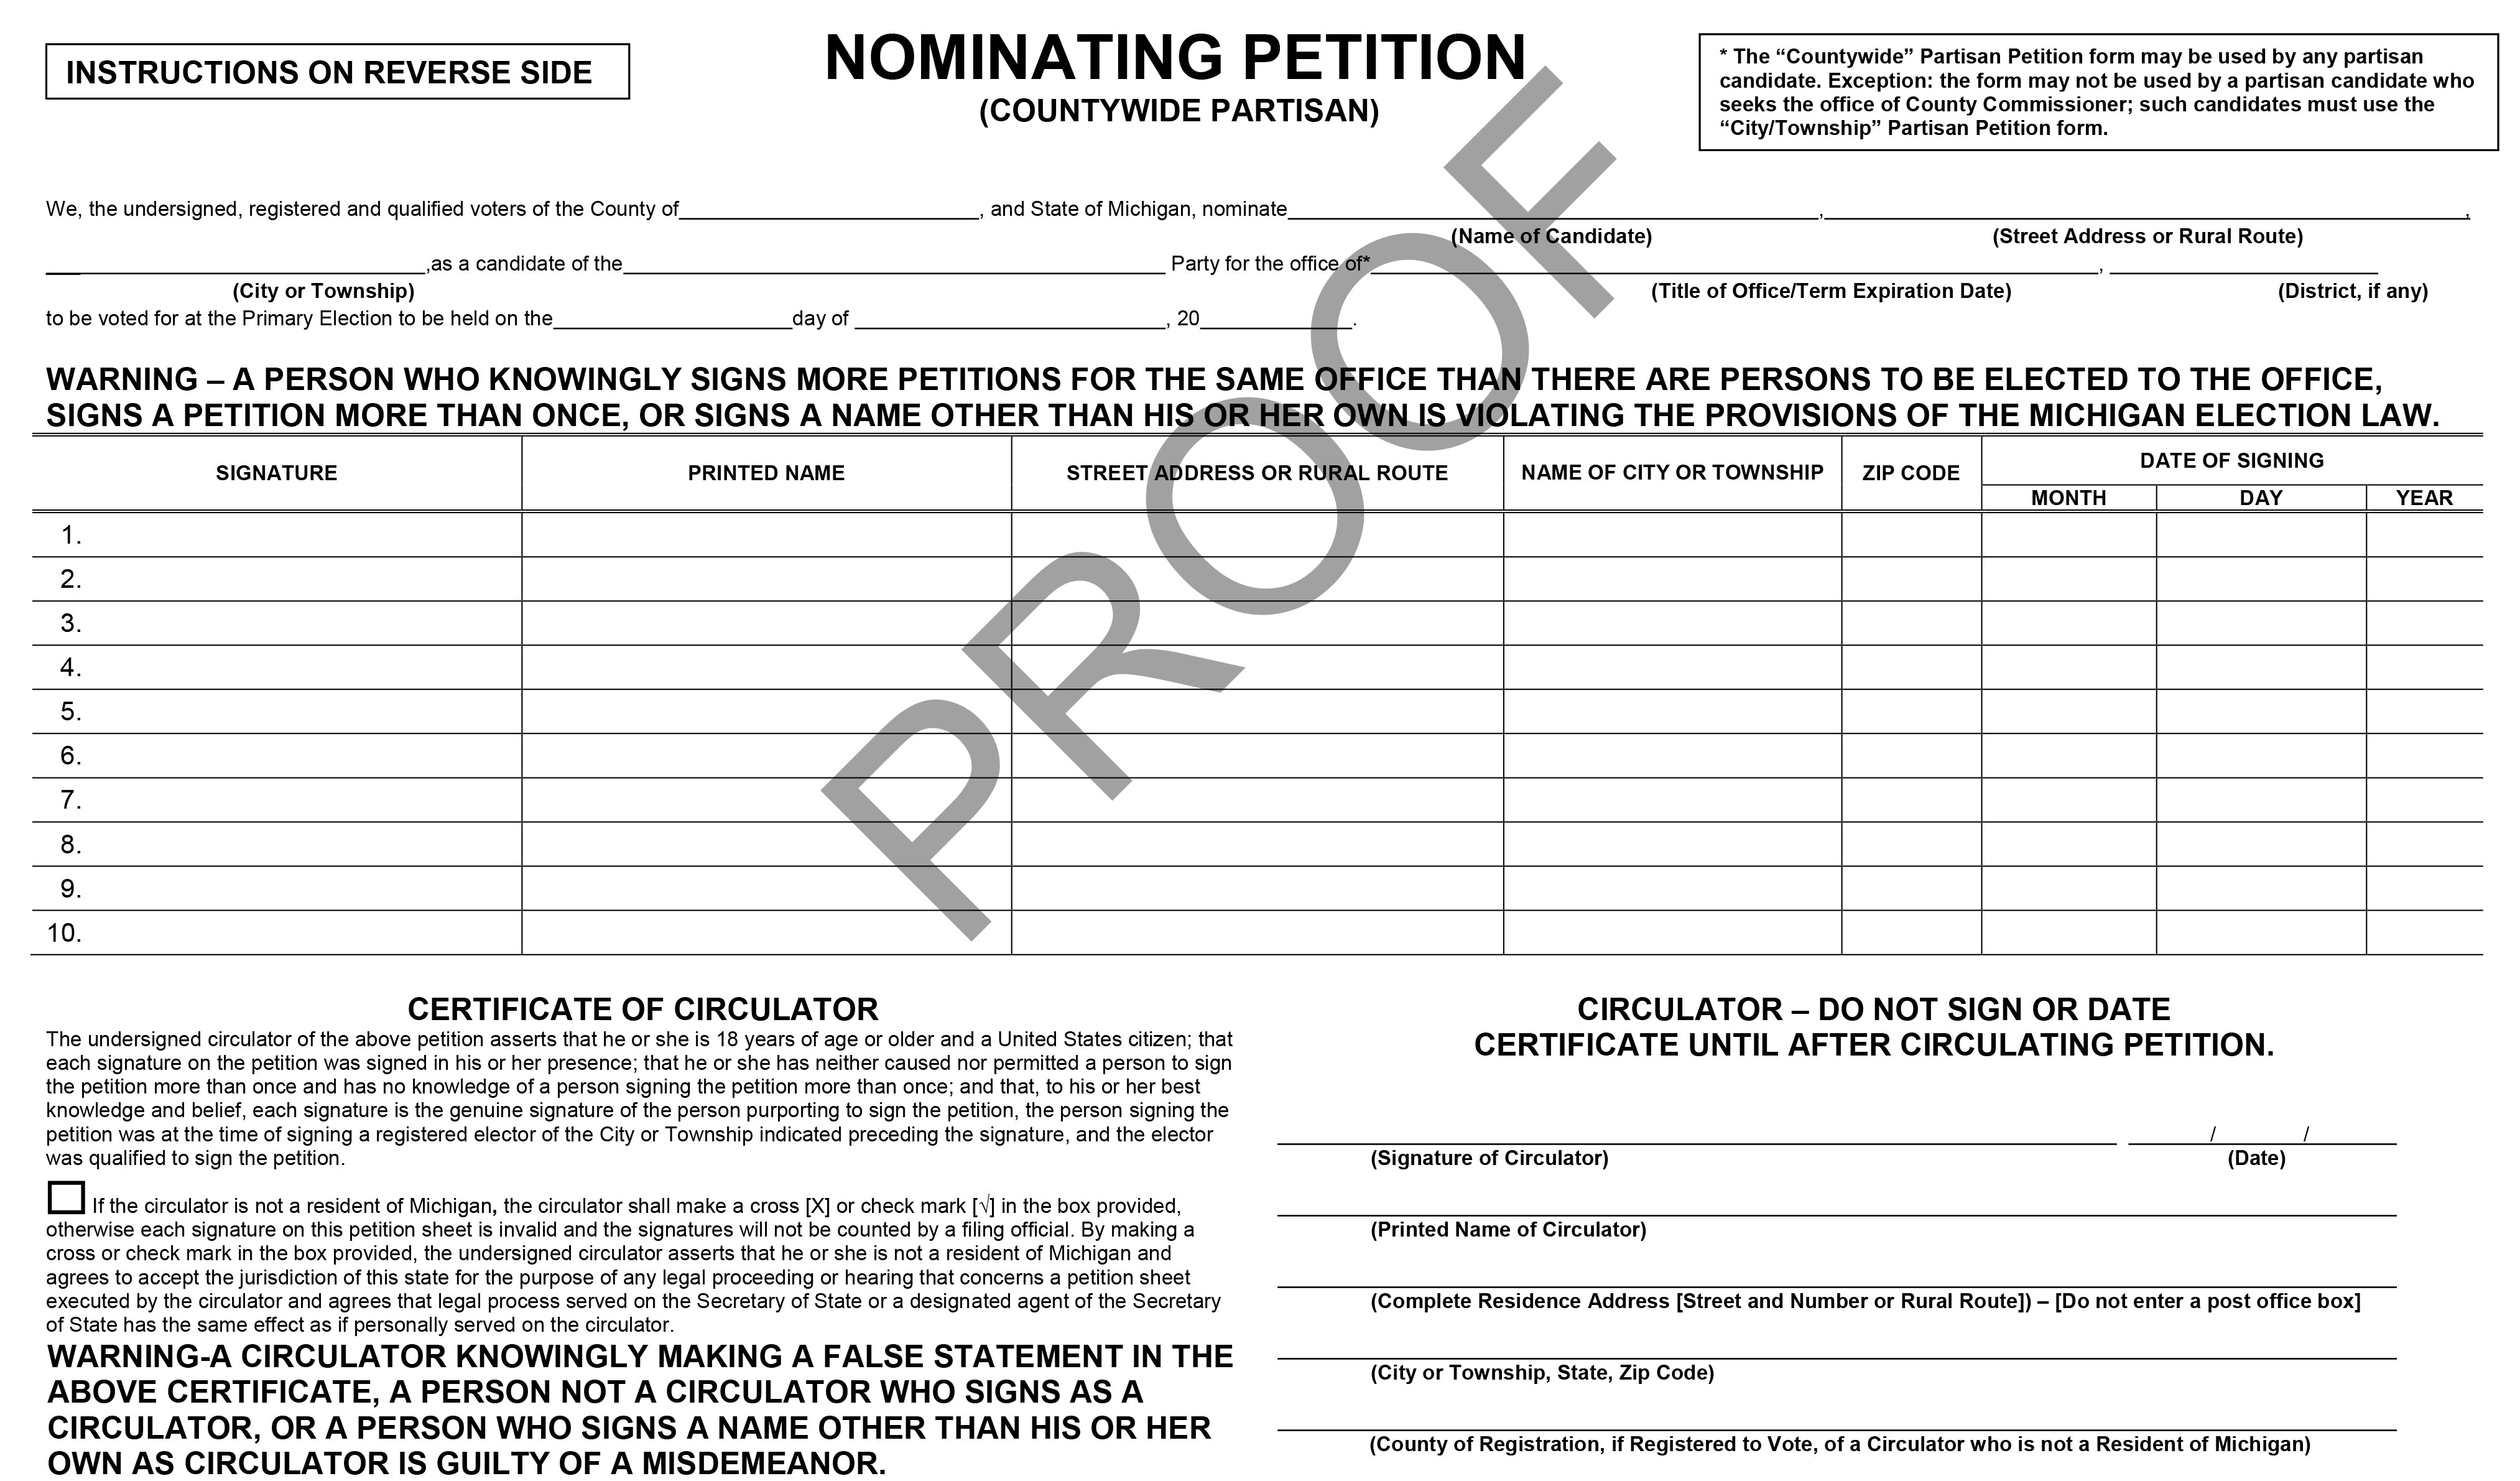 Nominating Petition (County Wide Partisan)